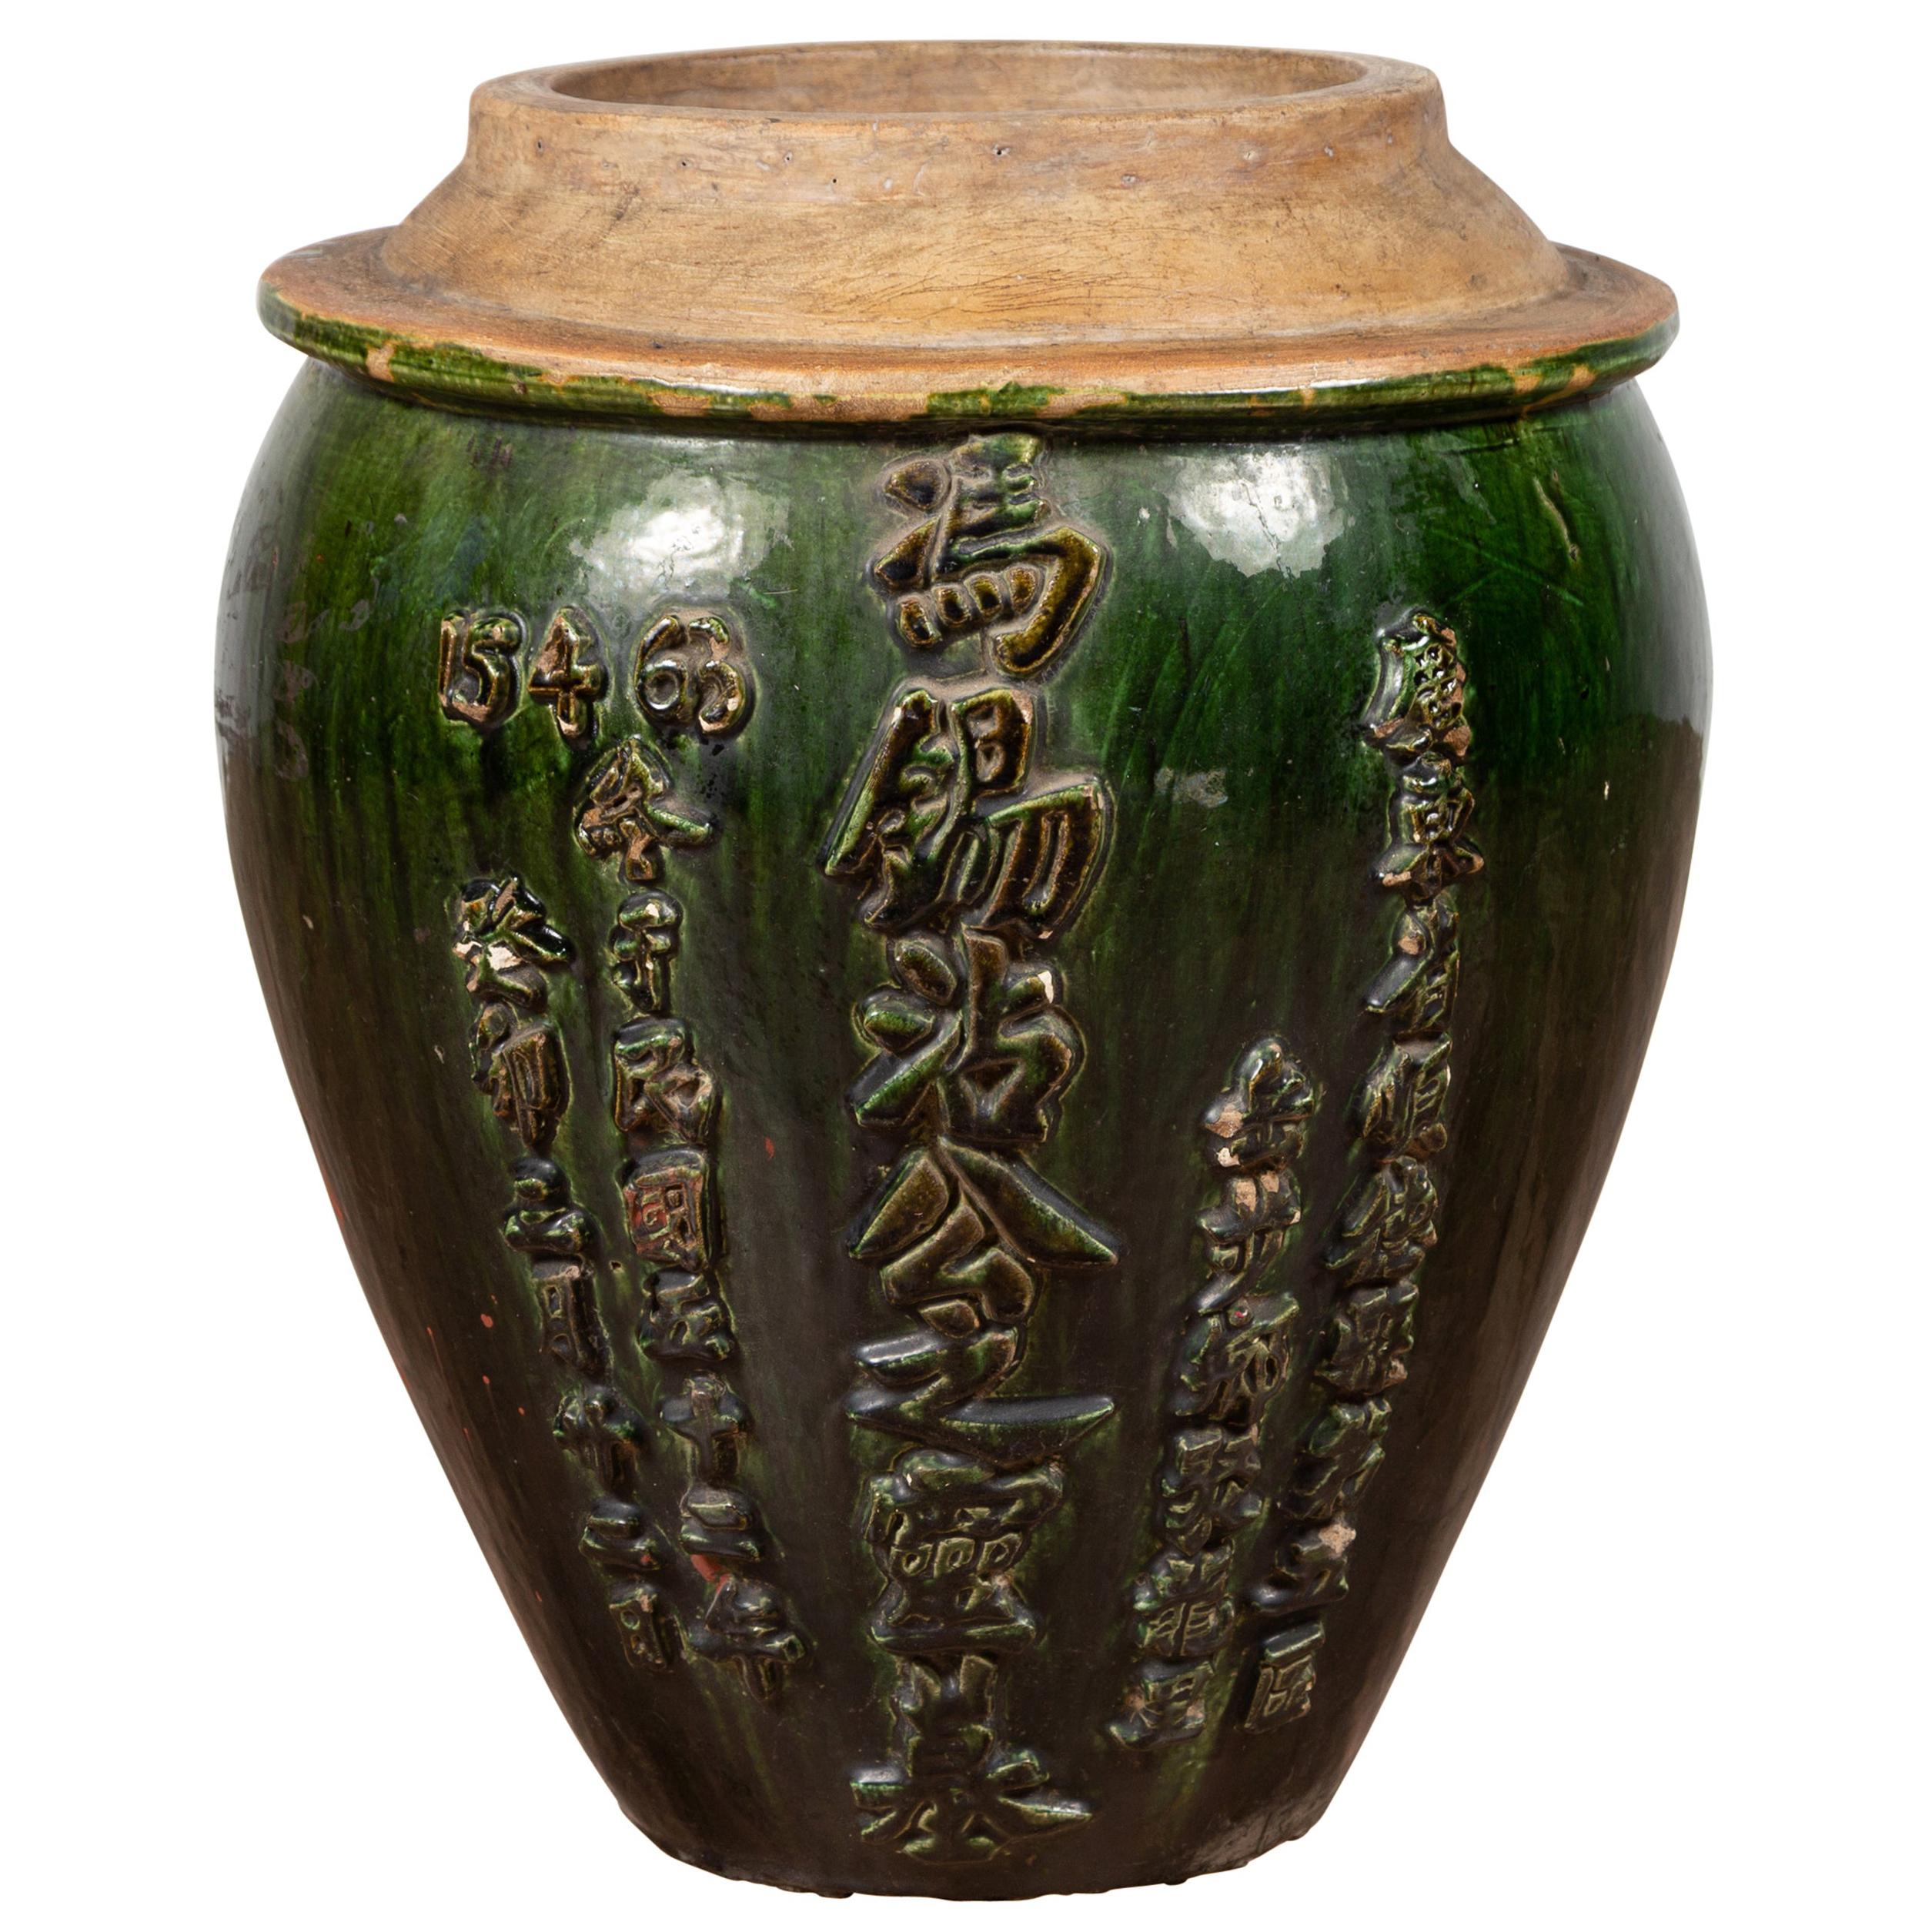 Chinese Green Glazed Ceramic Water Jug Pottery Planter with Calligraphy